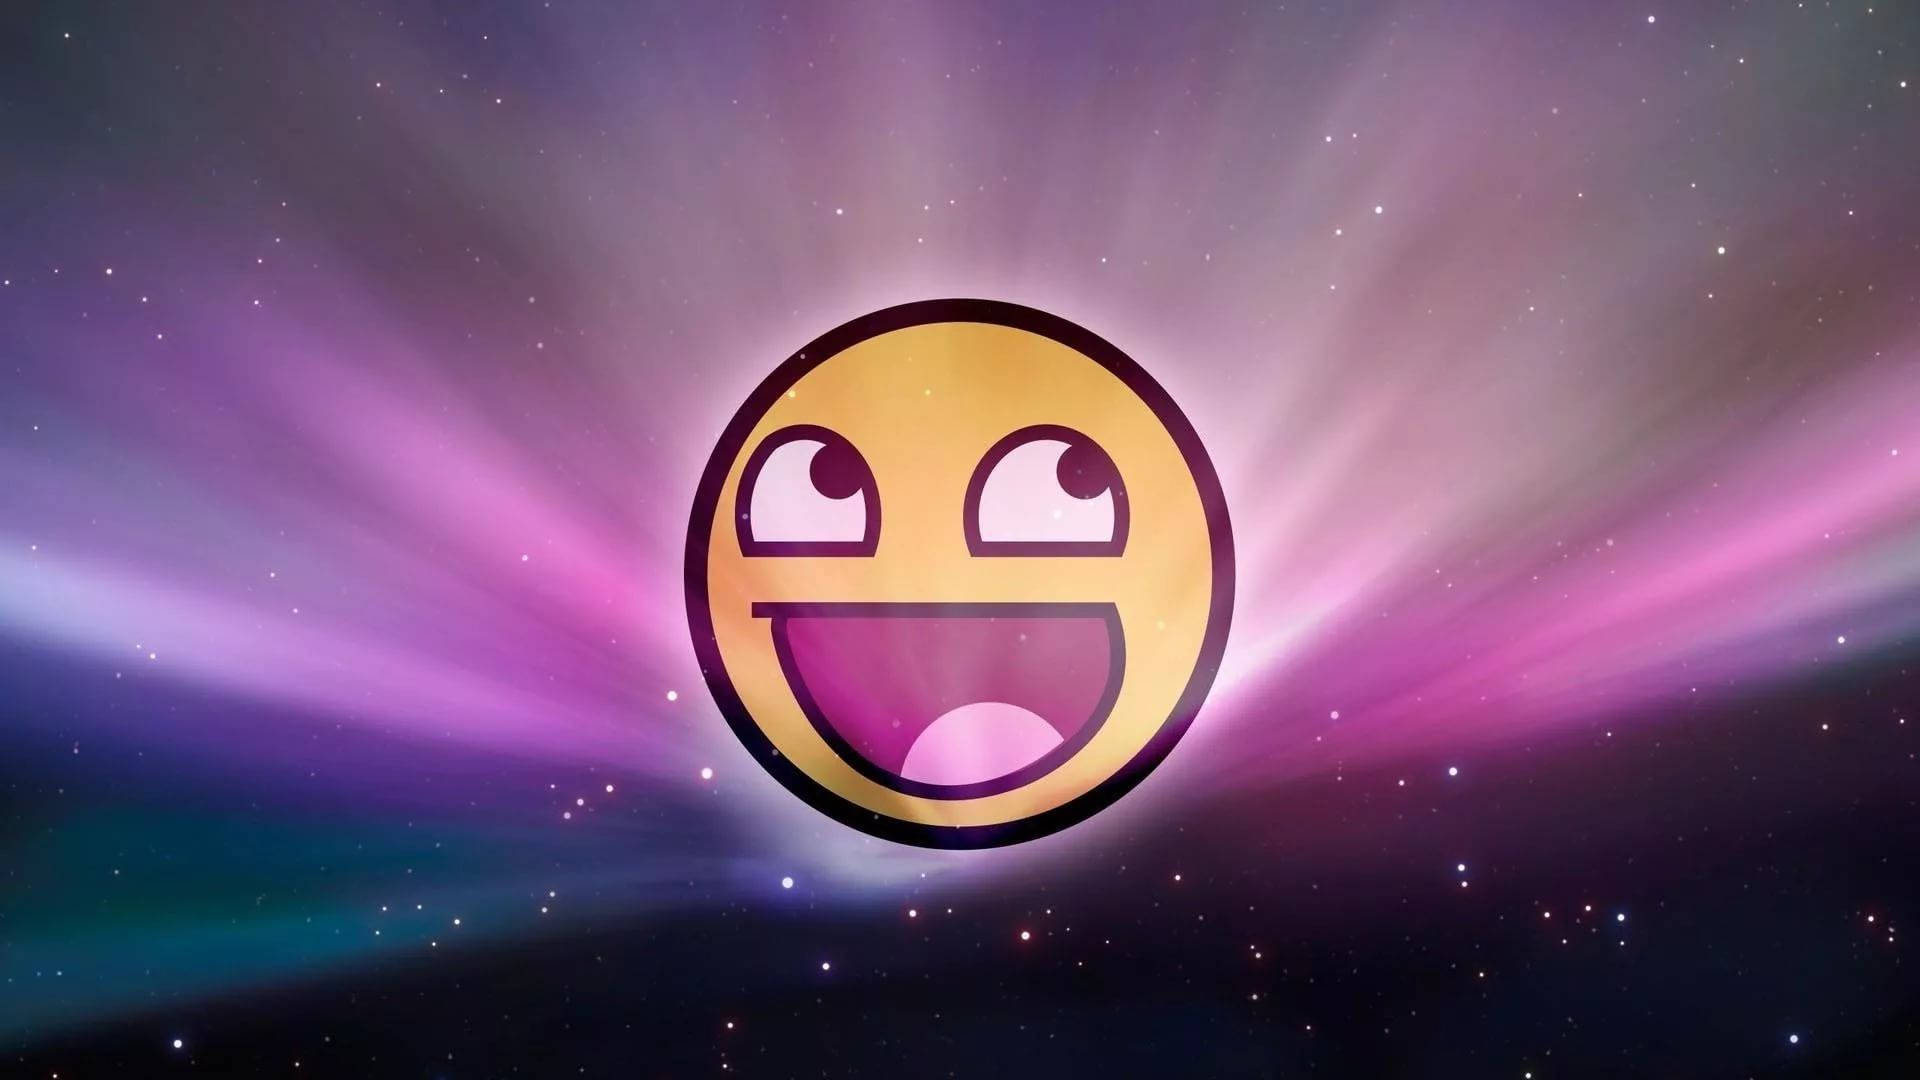 Epic Smiley Awesome Face Meme Wallpaper